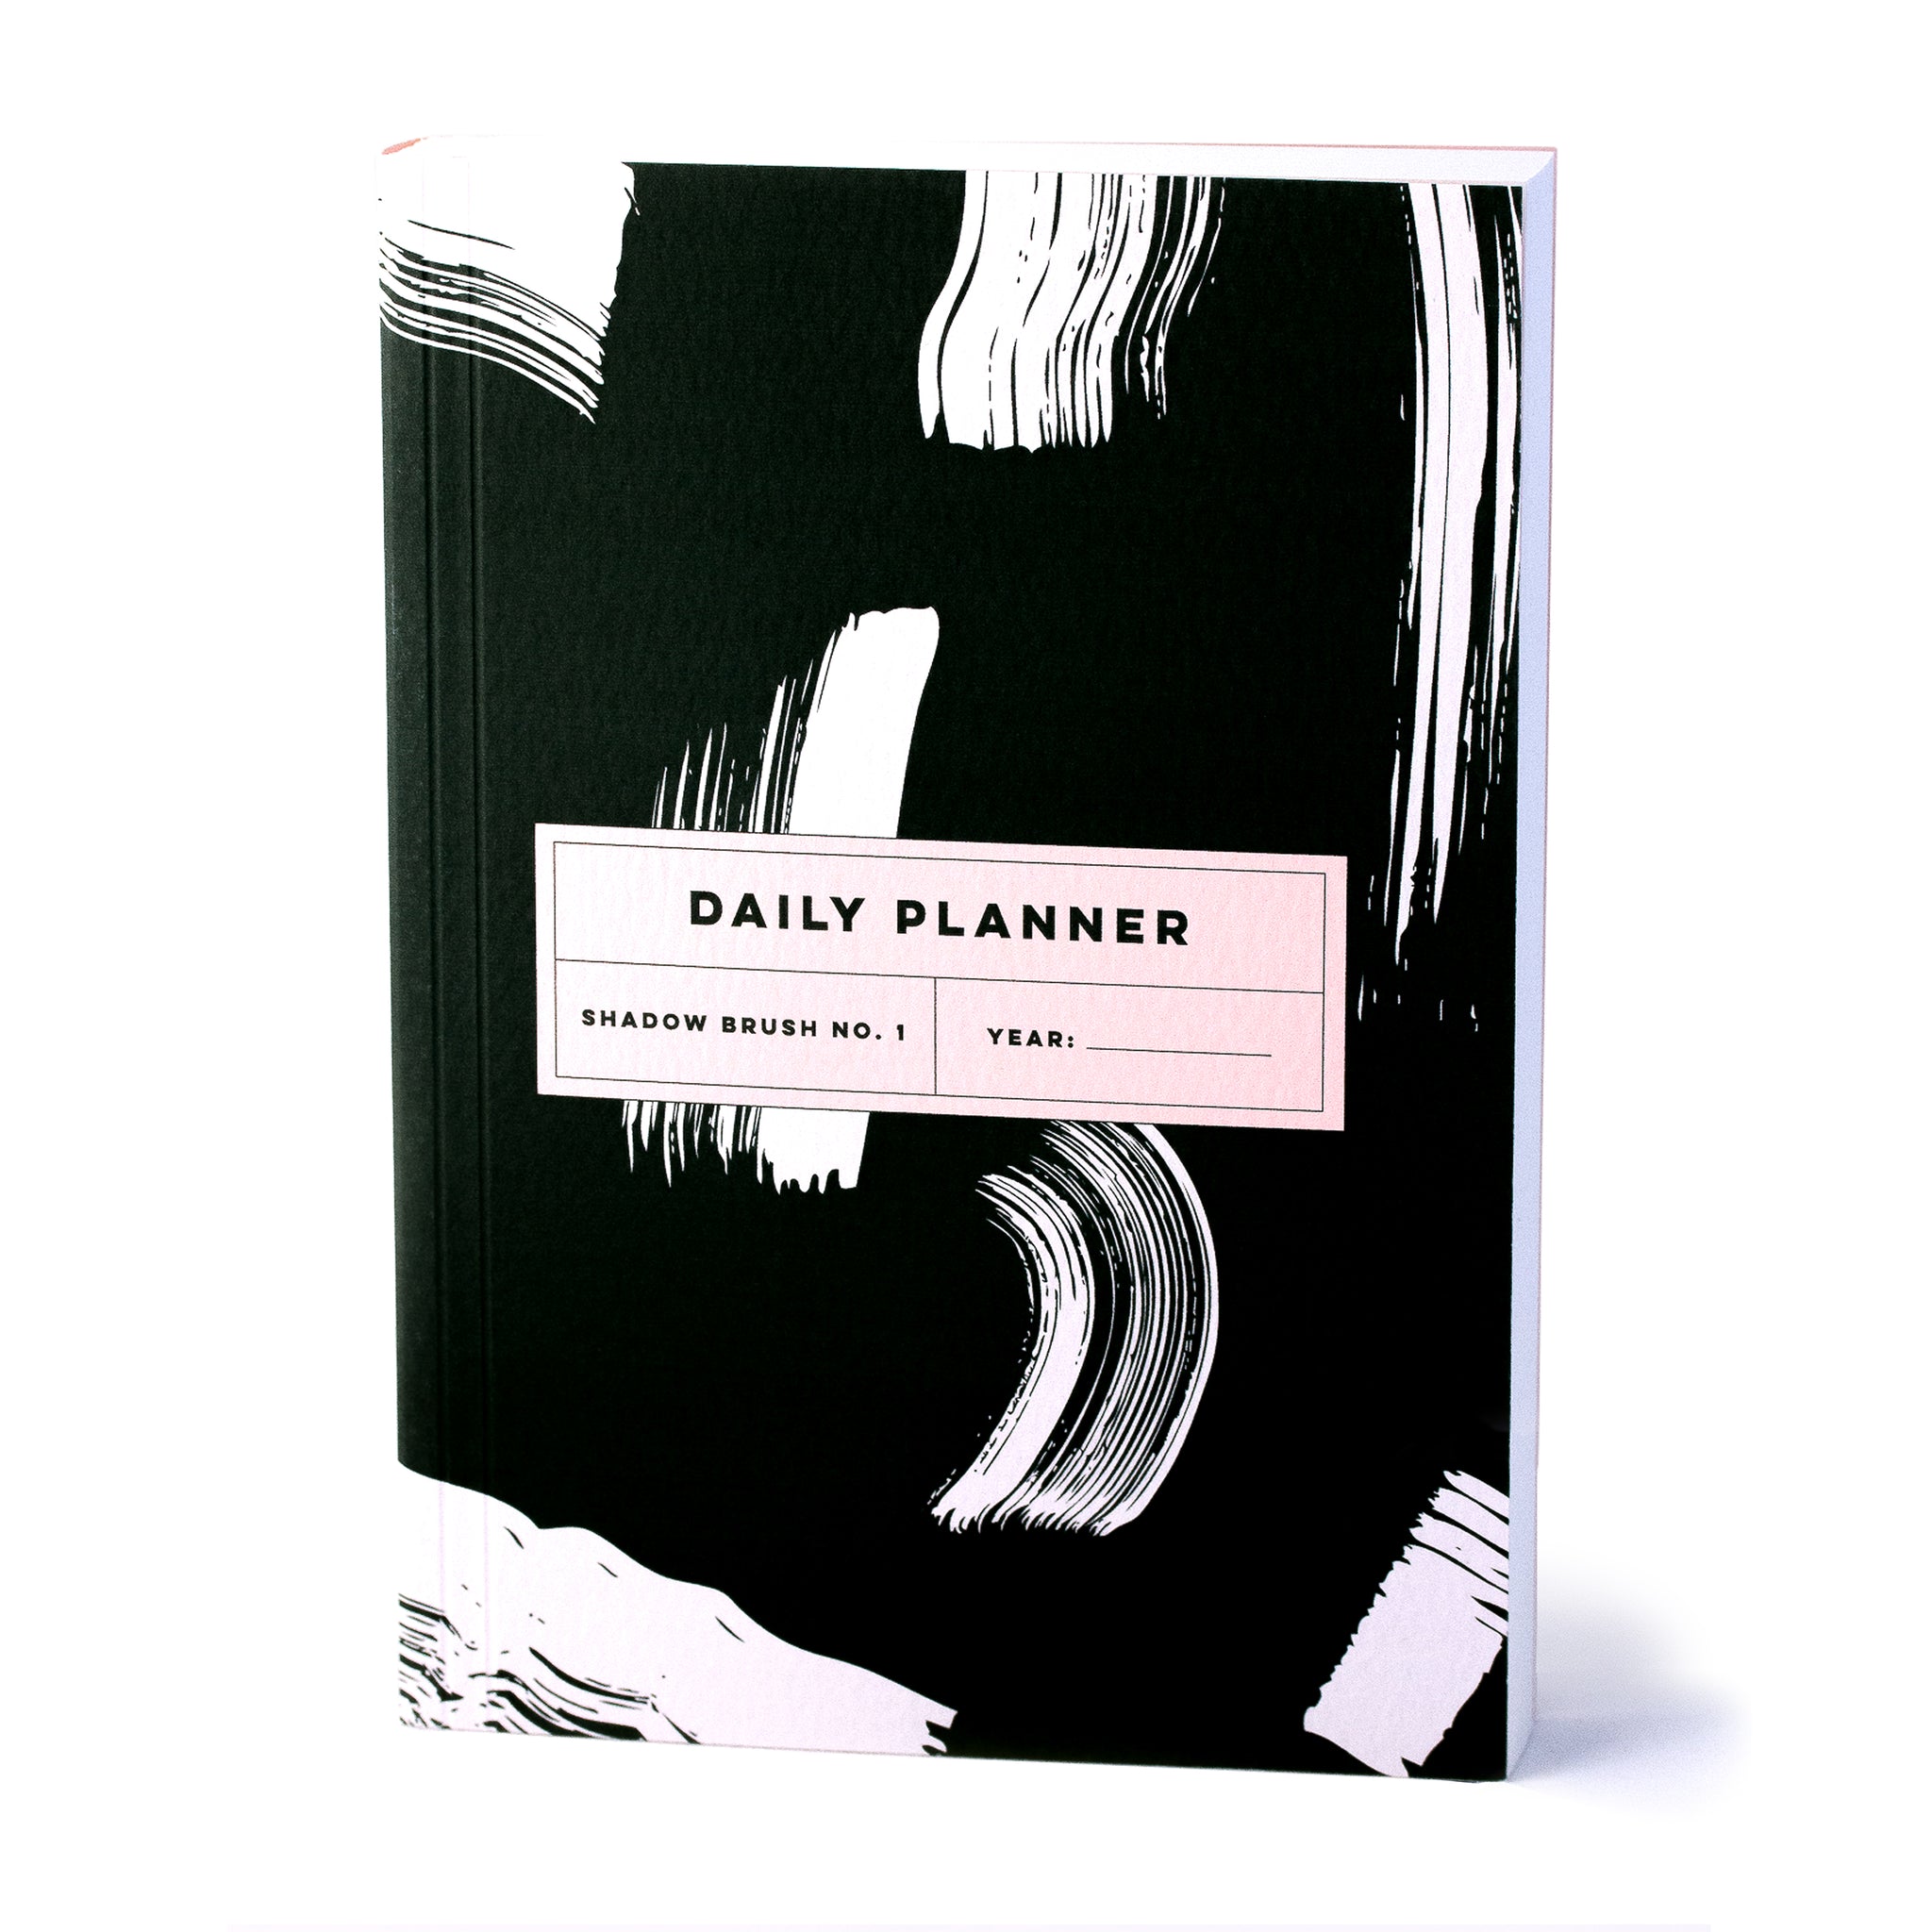 Daily Planner - Shadow Brush No.1 - The Completist